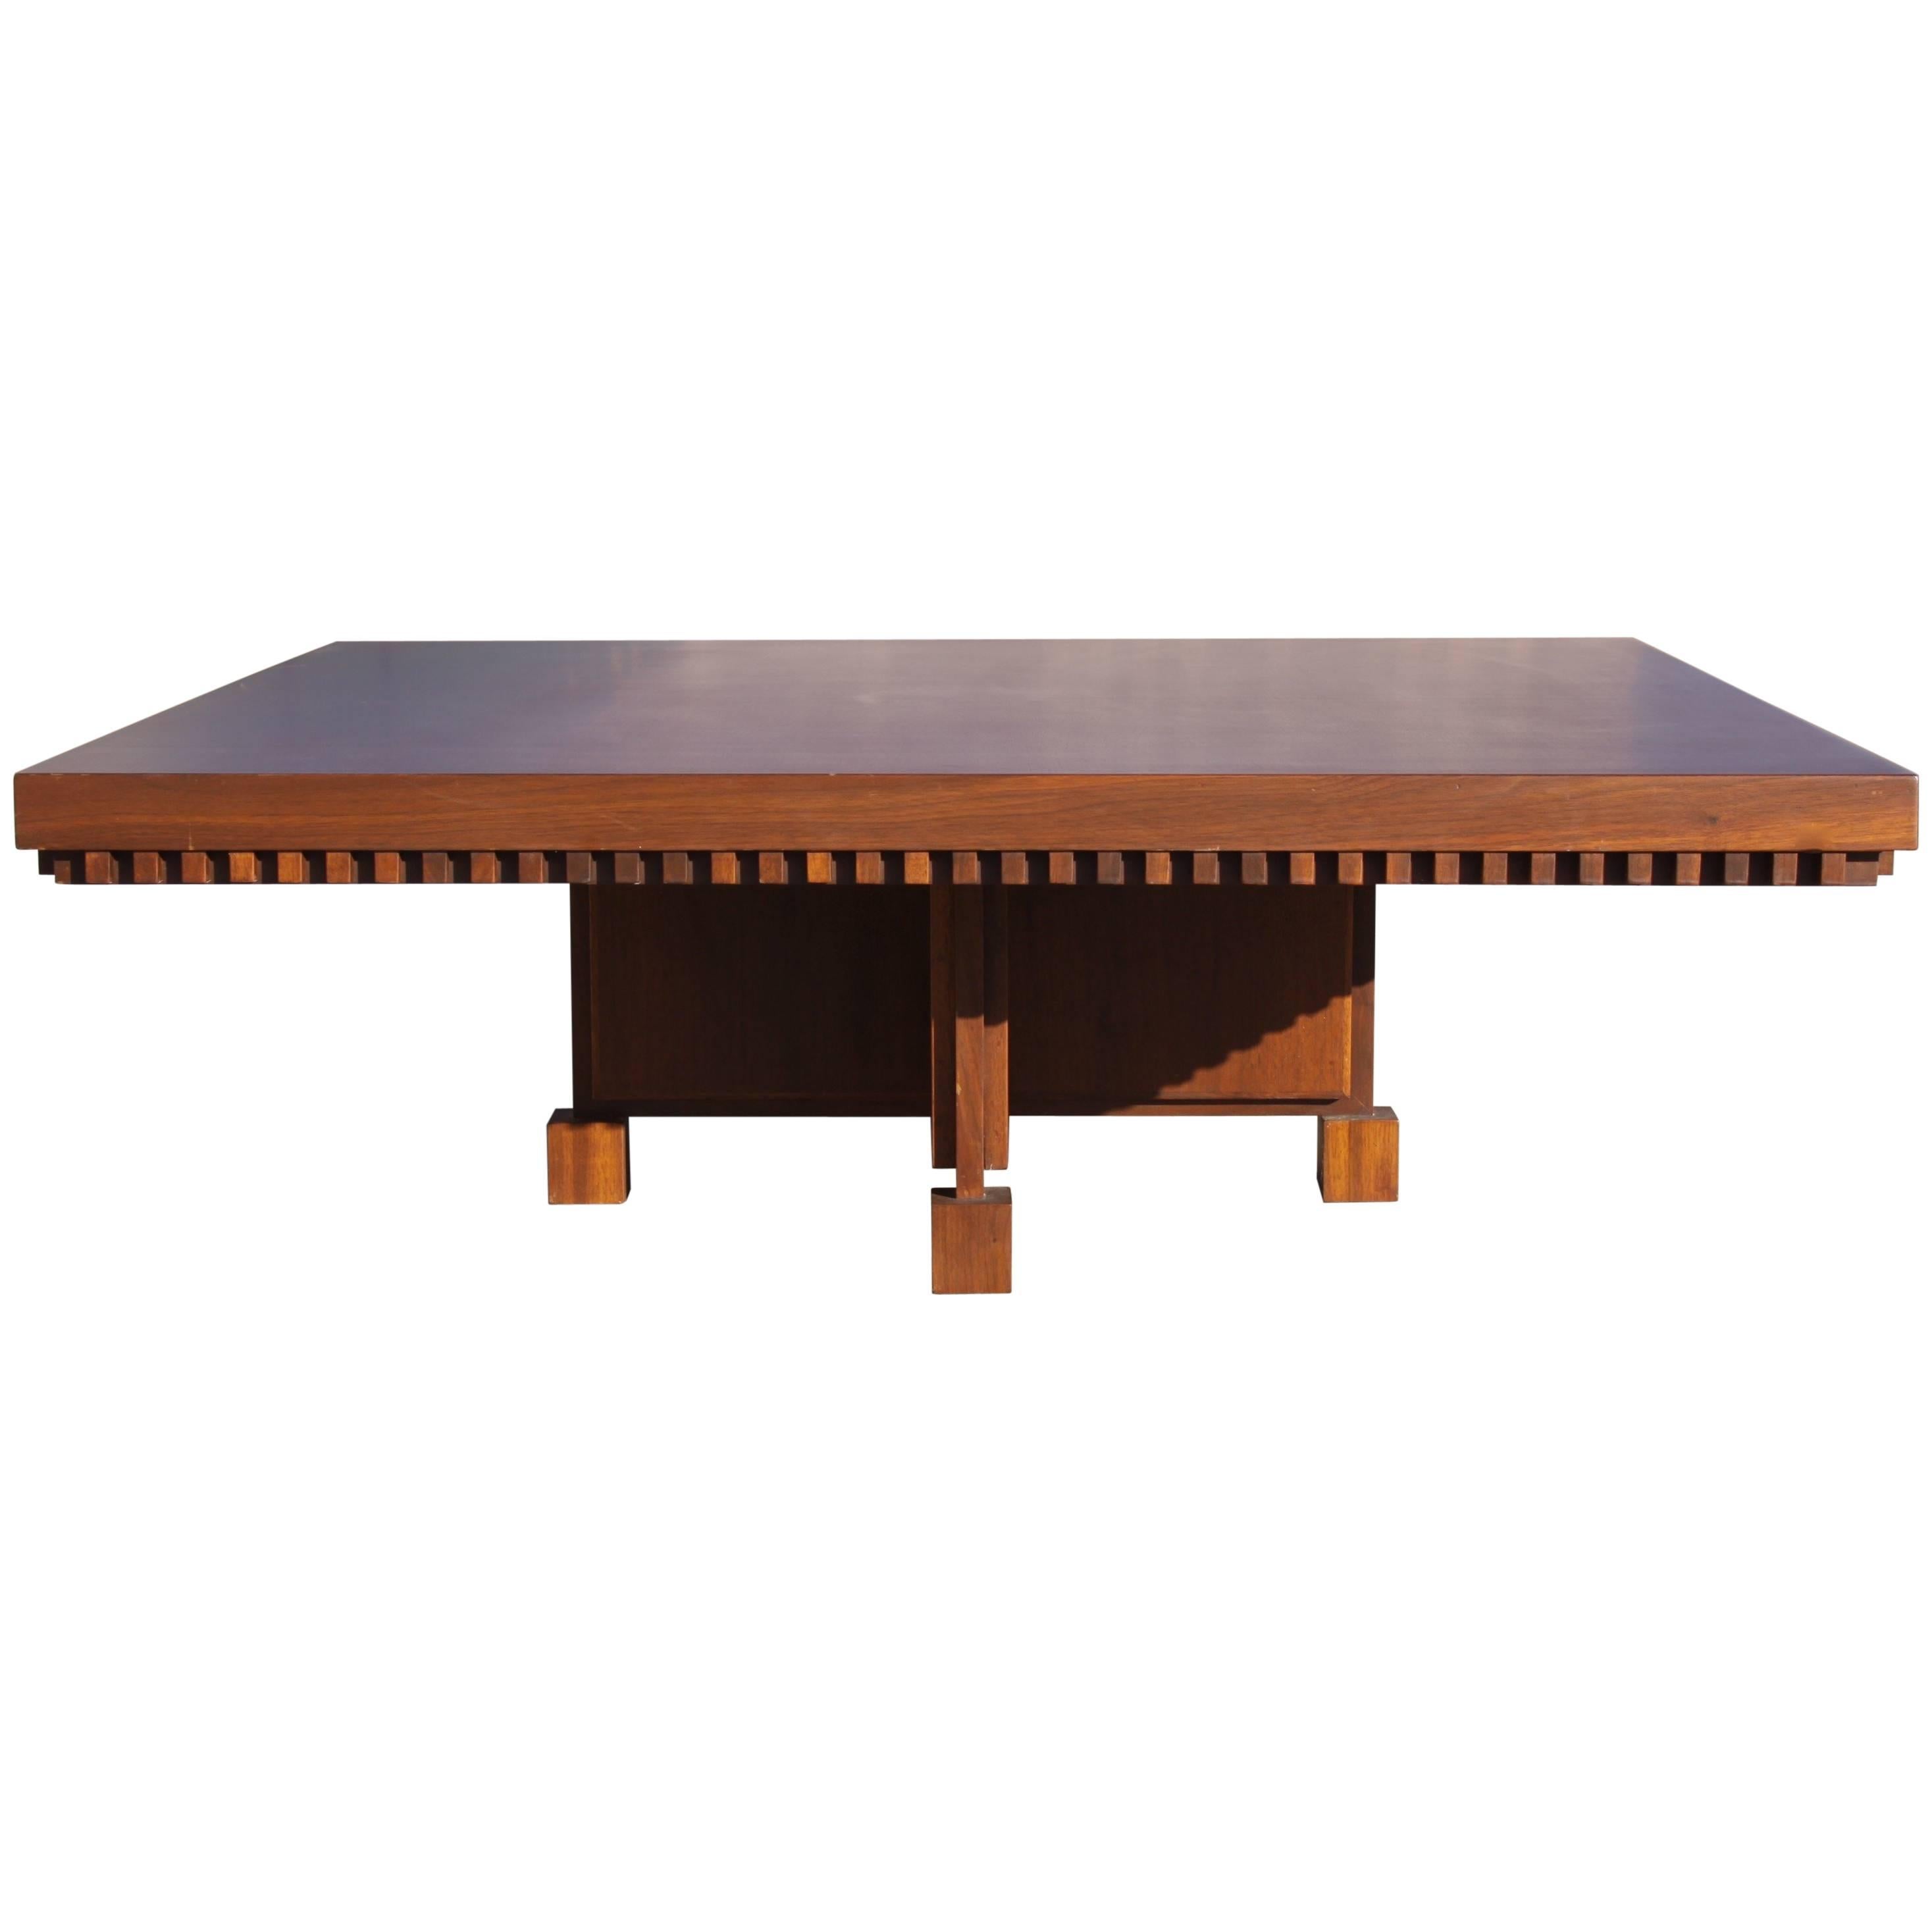 Architect Fred M. Kemp Custom Coffee Table in the style of Frank Lloyd Wright